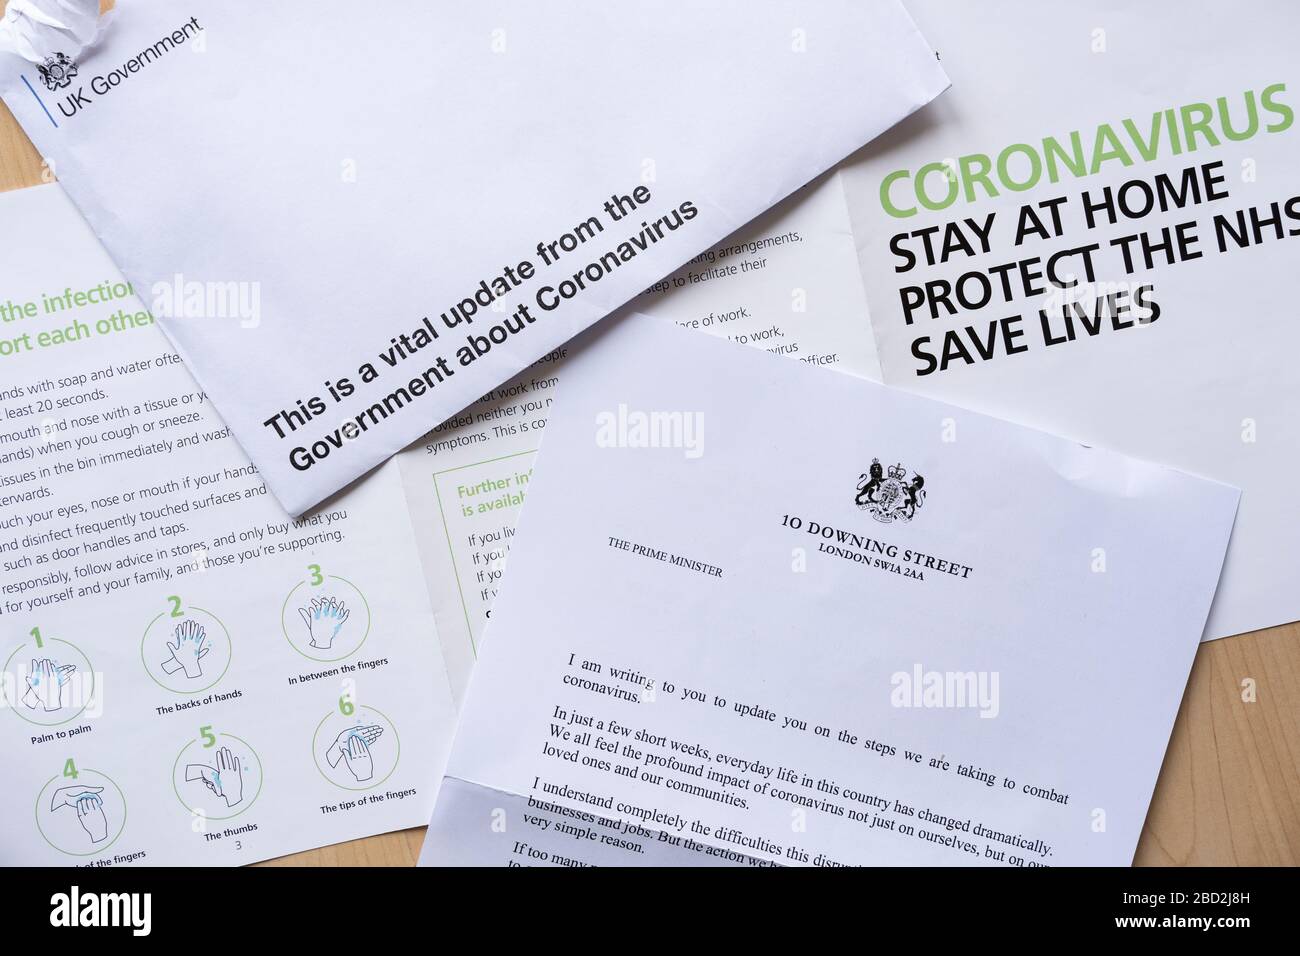 Official HM Government letter sent to all UK households as a vital update to the public about Coronavirus Covid-19 during the pandemic, April 2020 Stock Photo